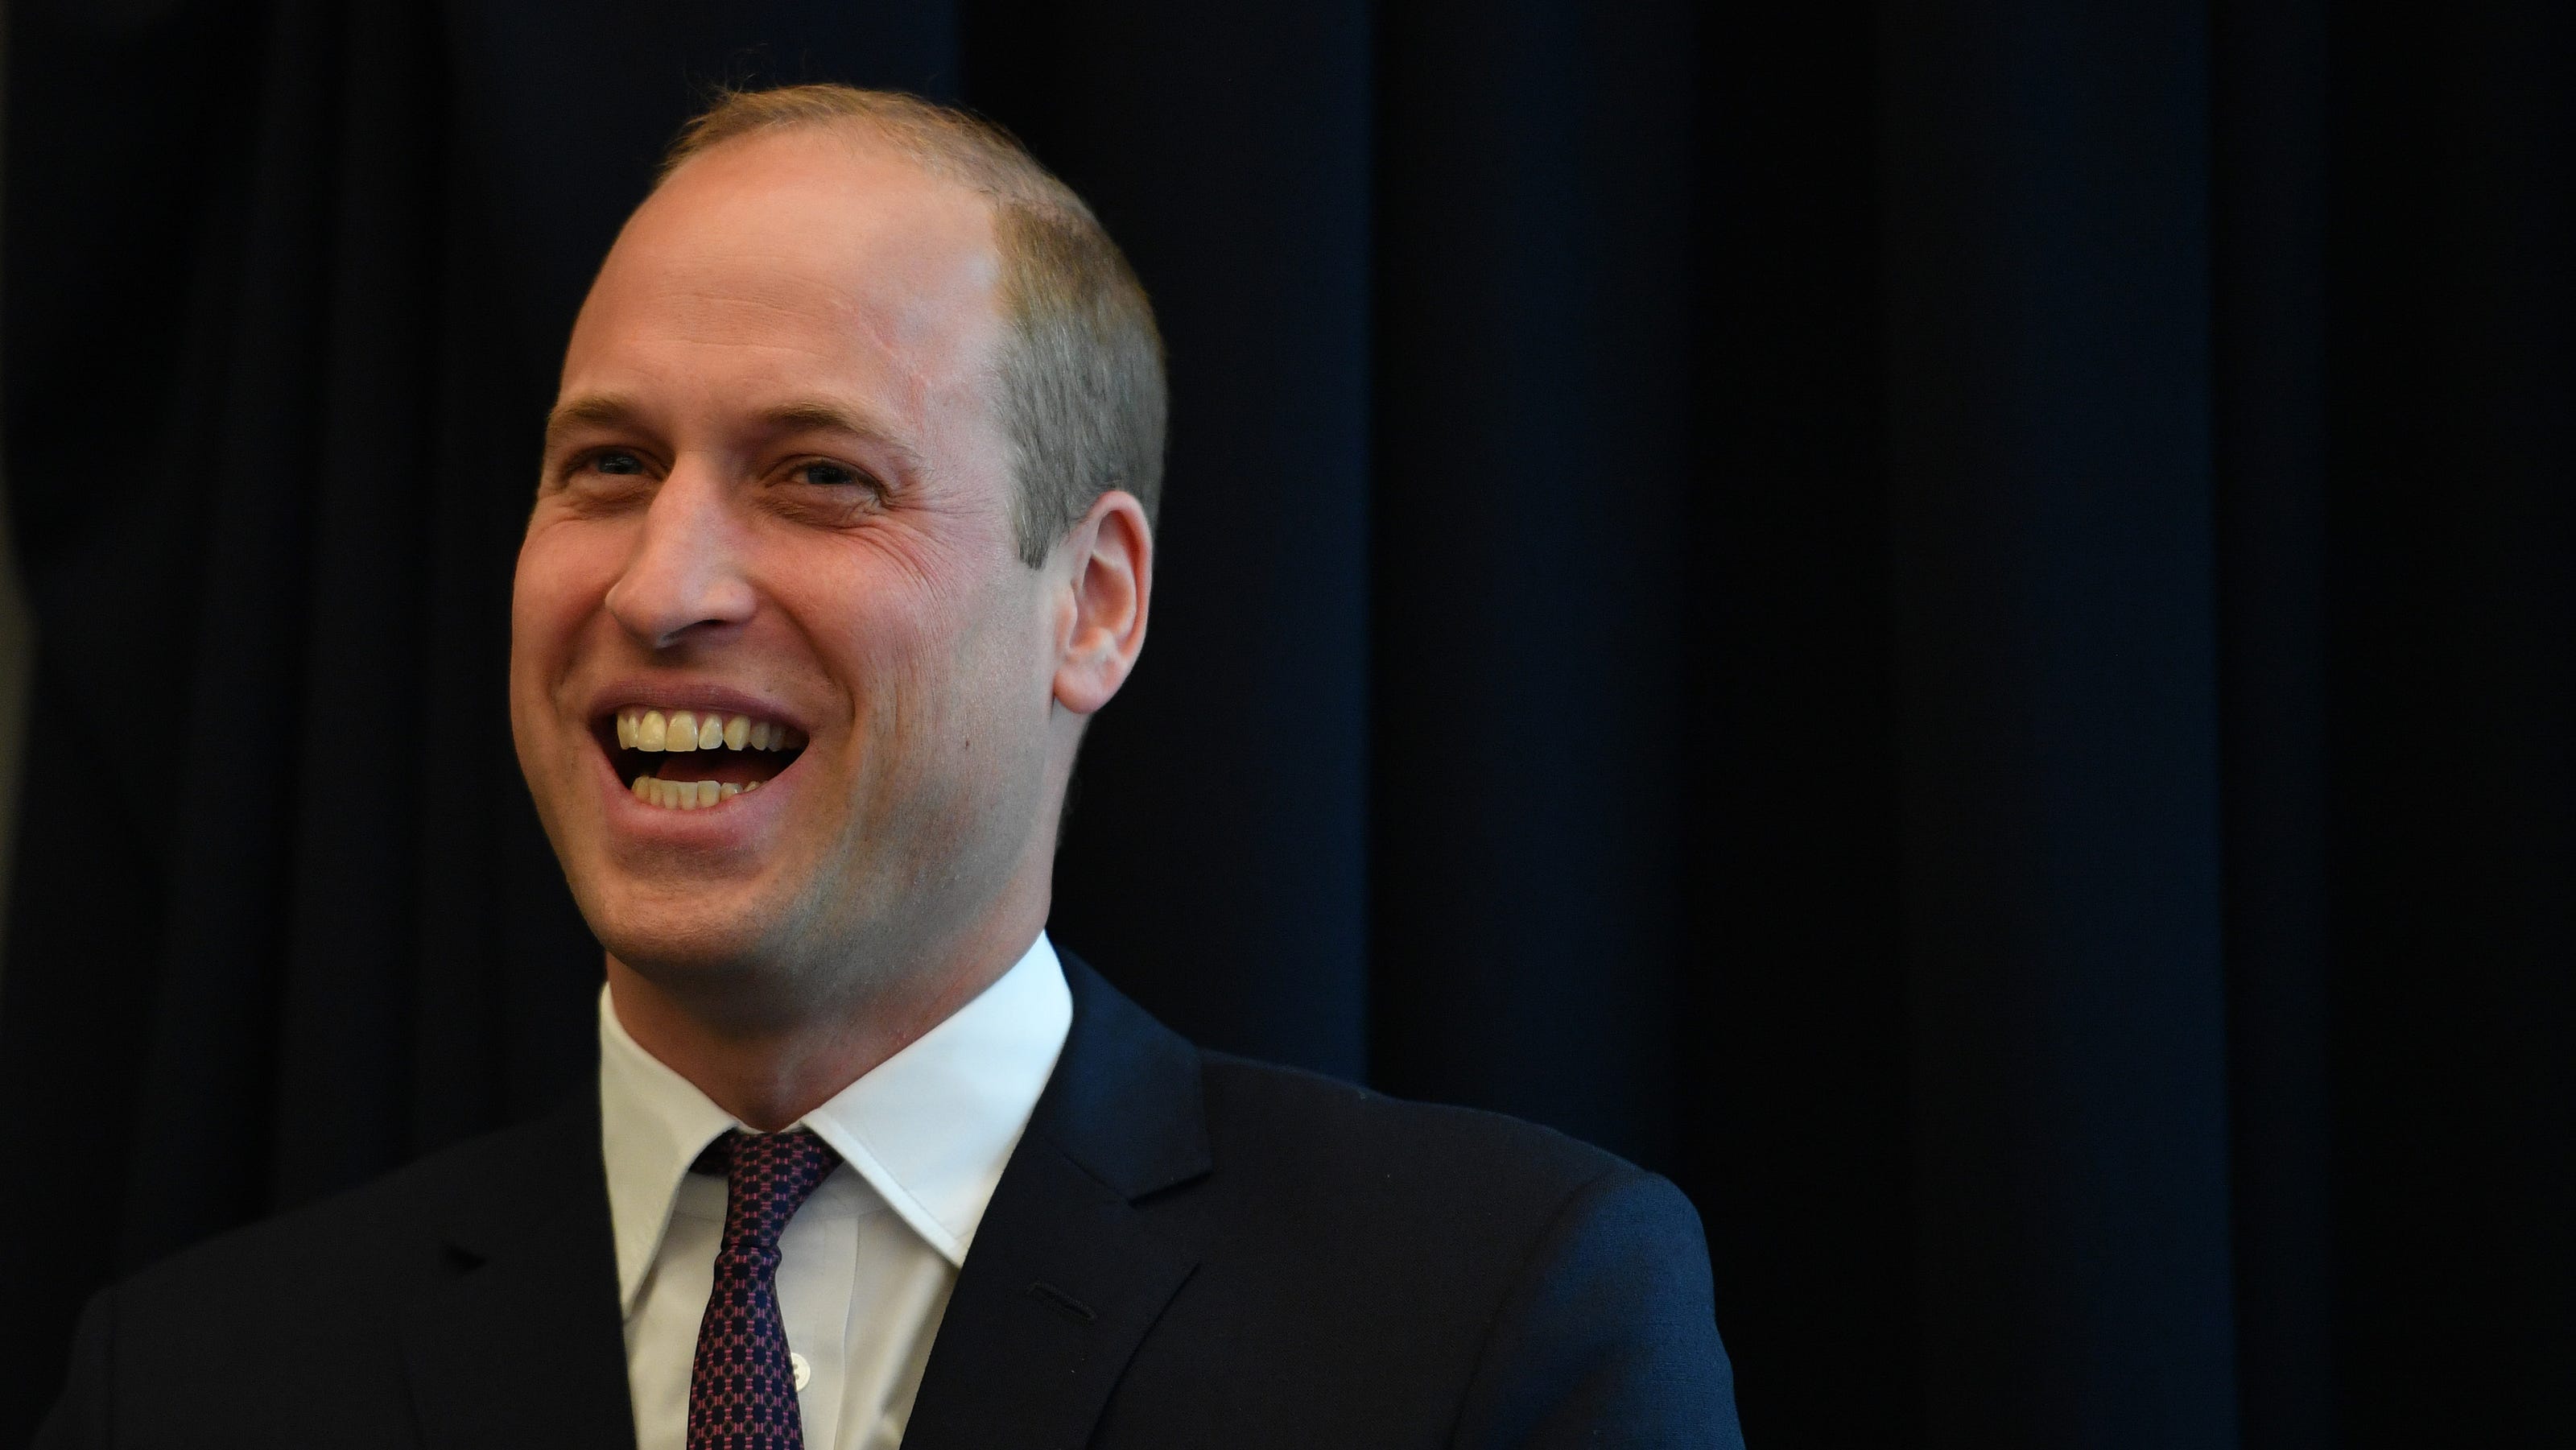 Prince William urges leaders to take action against climate change in his first Ted Talk - USA TODAY